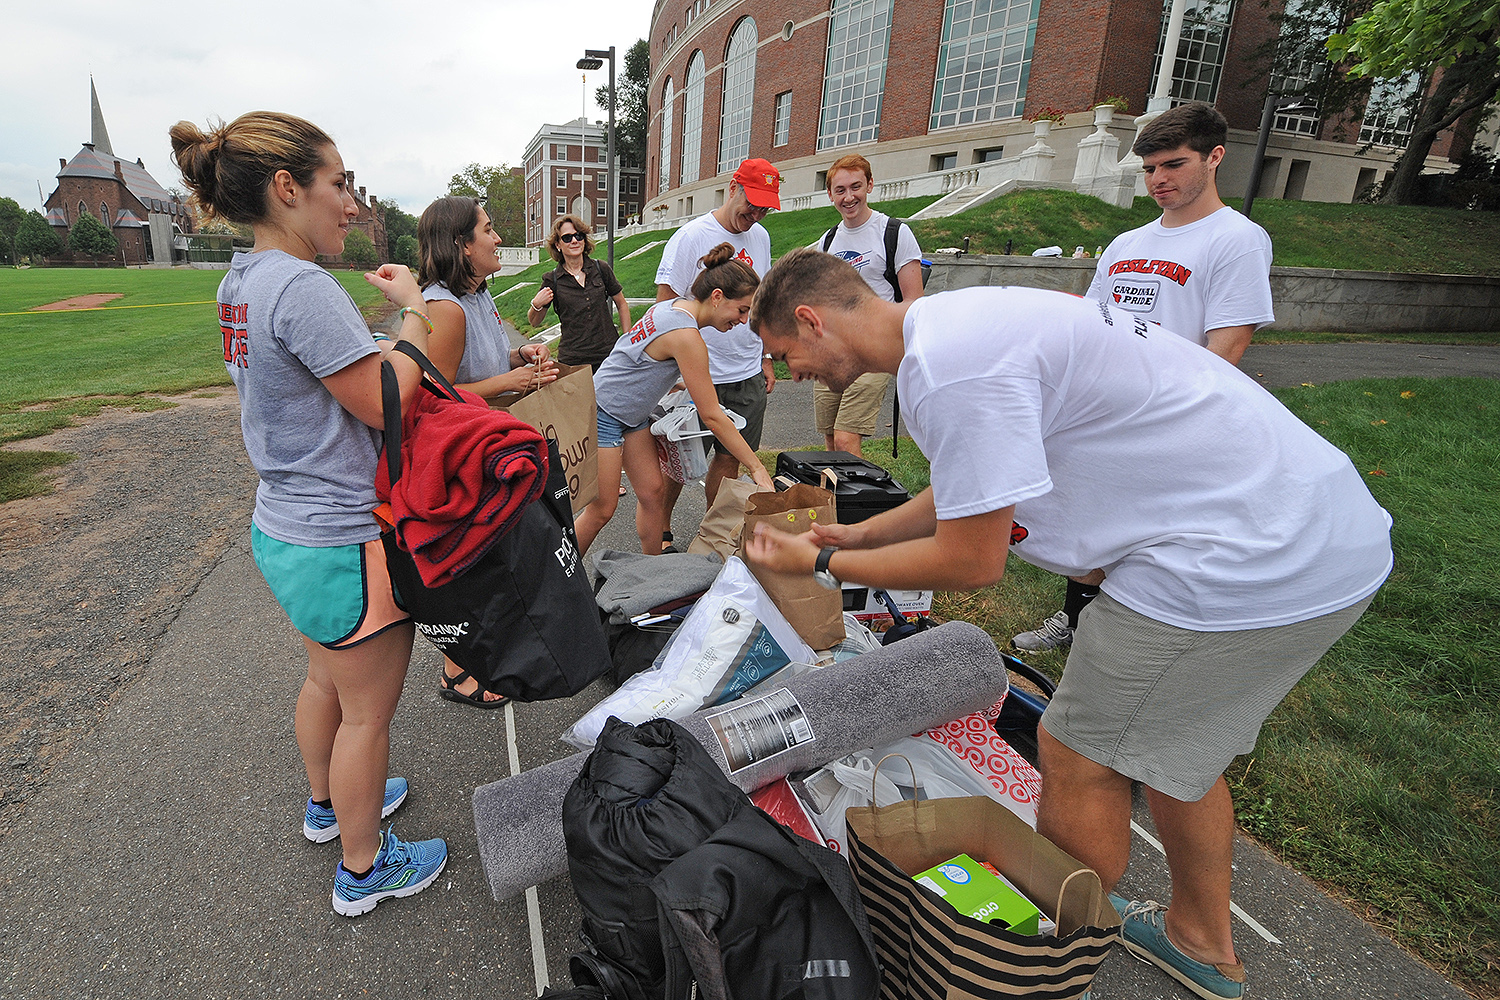 Several Wesleyan student athletes, upperclassmen and Wesleyan staff and faculty helped new students move their belongings on Arrival Day. Aug. 31.